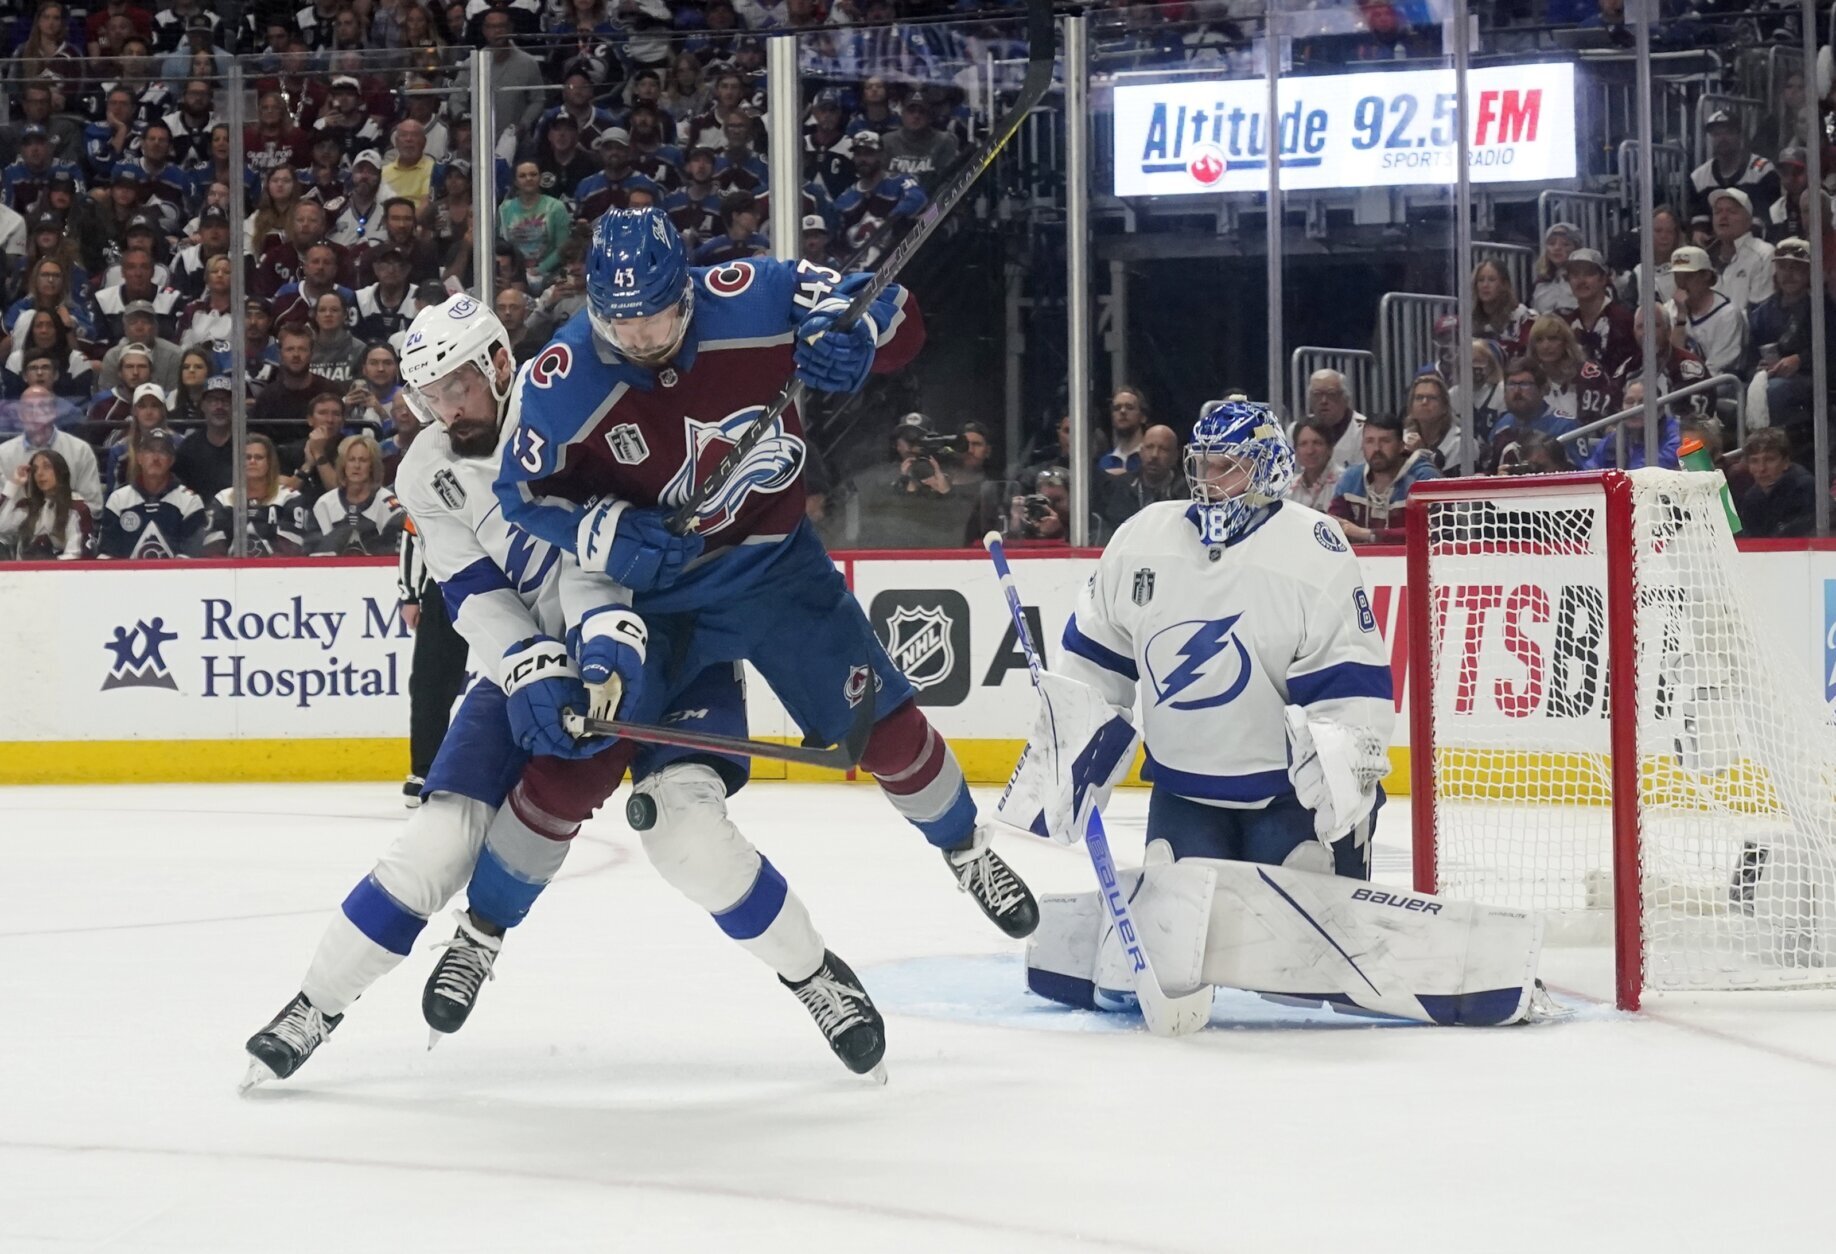 OT goal lifts Avalanche over Lightning 3-2 in Game 4